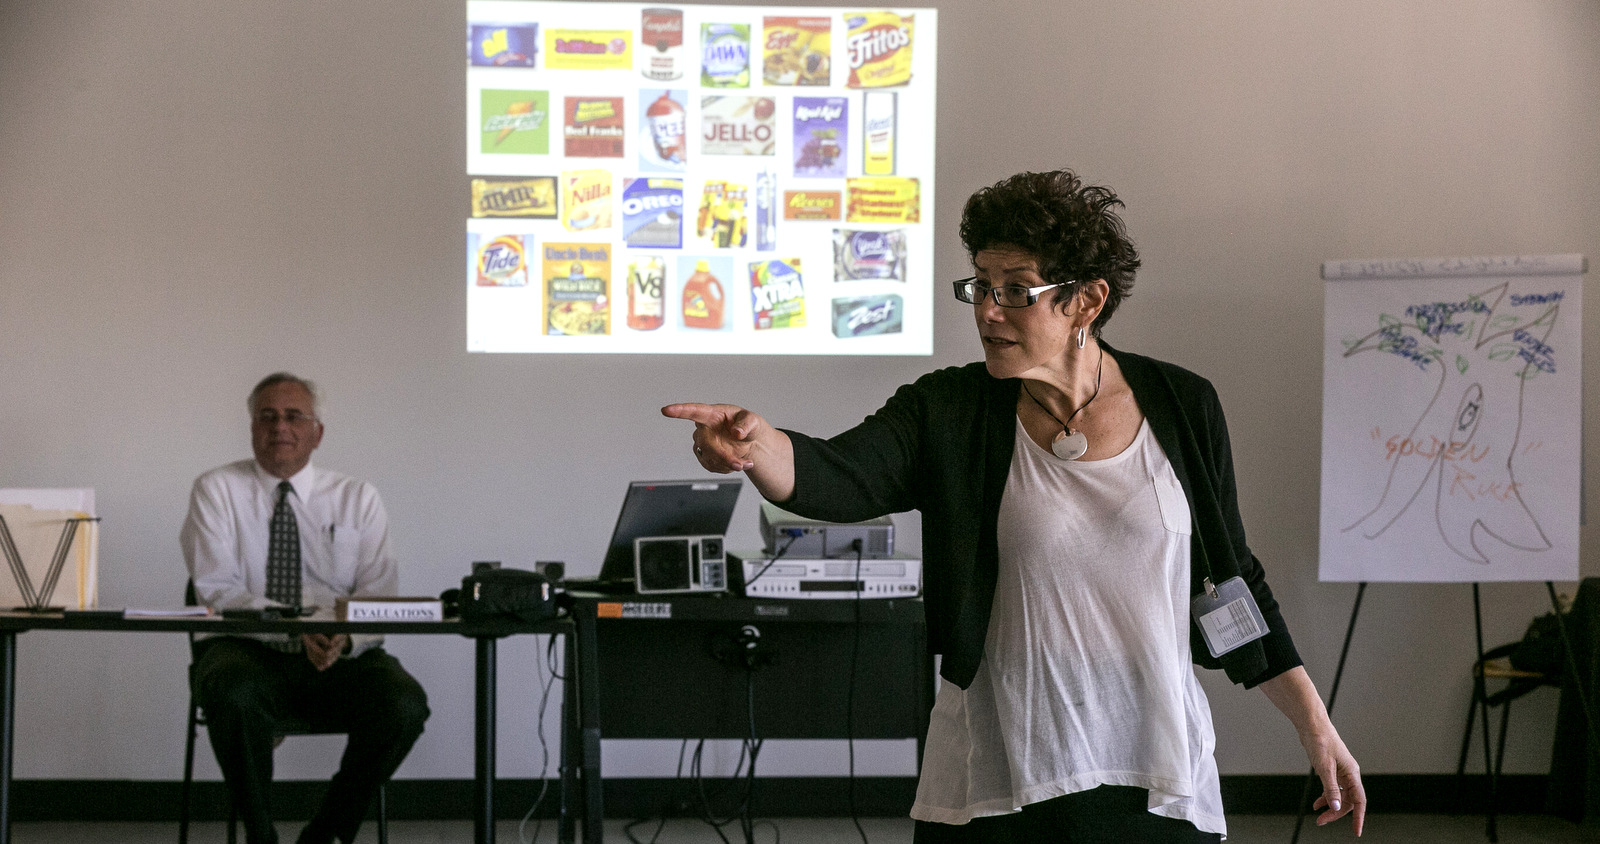 Former LAPD officers Don Wynne, left, and Ann Bozzi instruct Los Angeles Police Department officers to recognize unconscious prejudices and how they can impact behaviors on the street at a class at the Museum of Tolerance in Los Angeles. (AP/Damian Dovarganes)